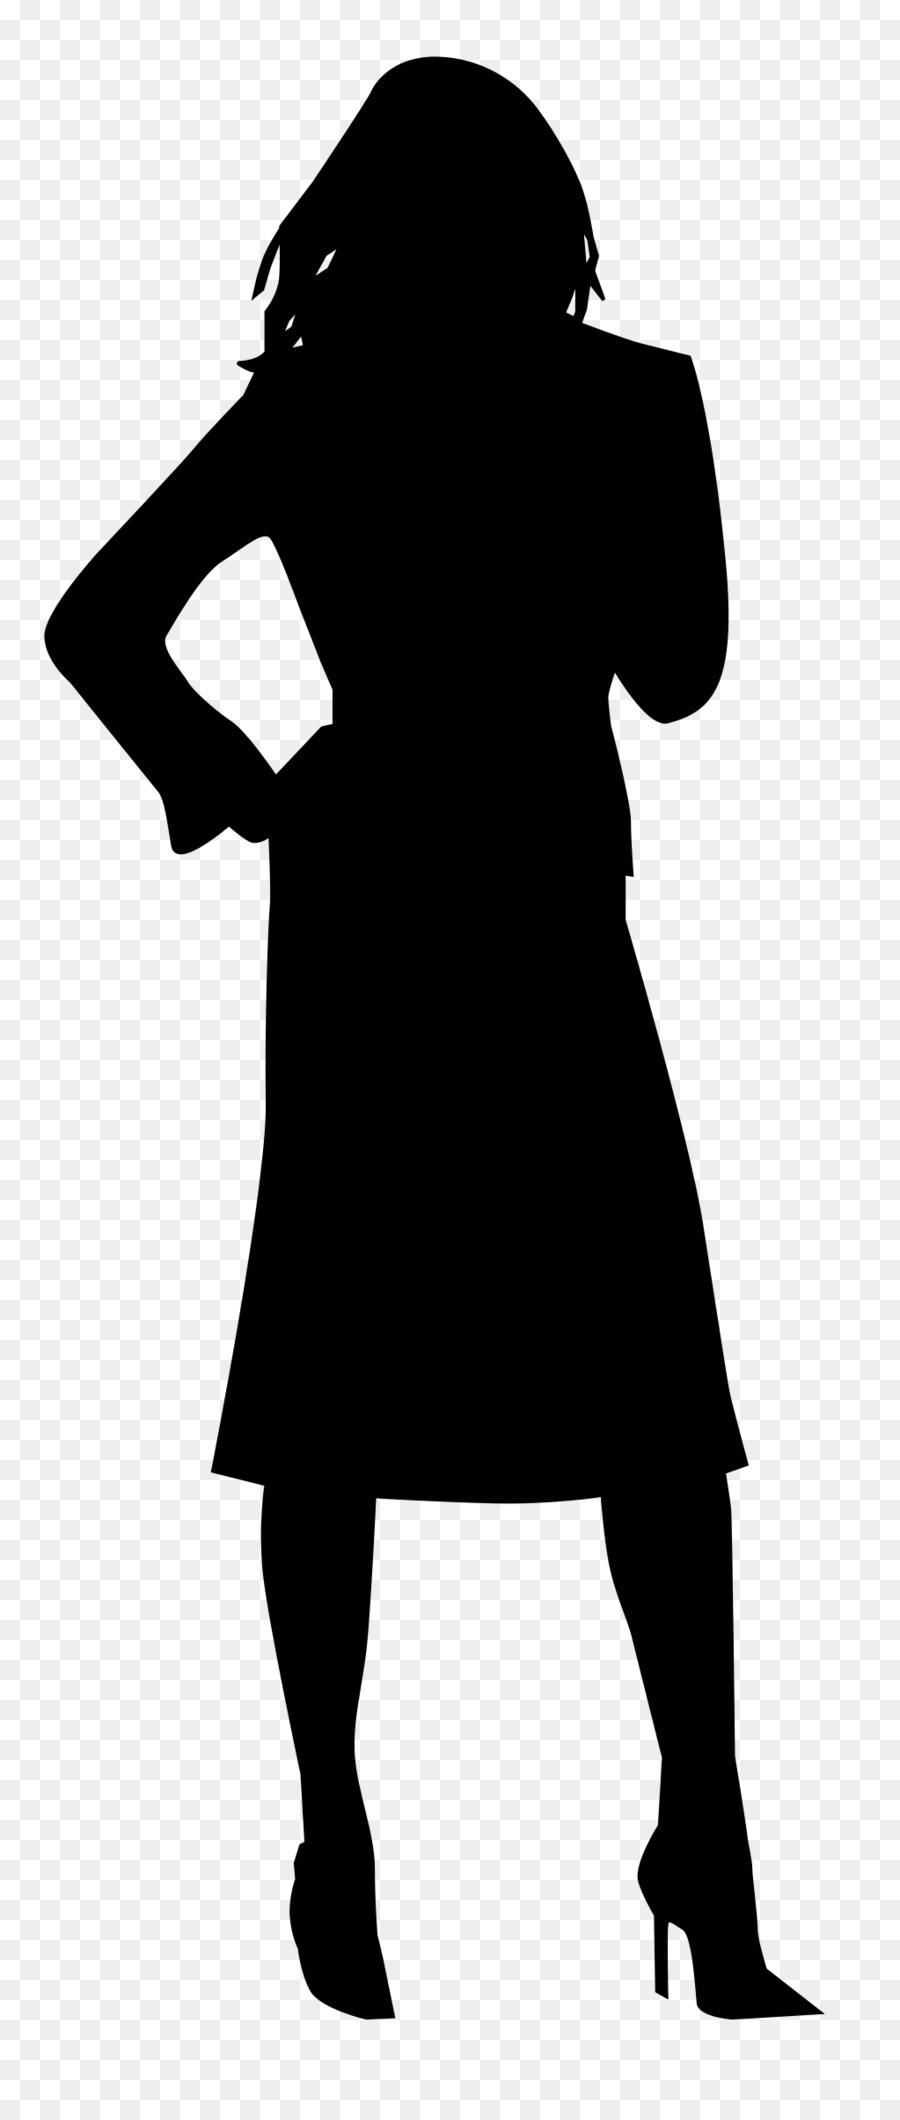 Silhouette Woman Clip art - Silhouette png download - 1023*2400 - Free Transparent  png Download.